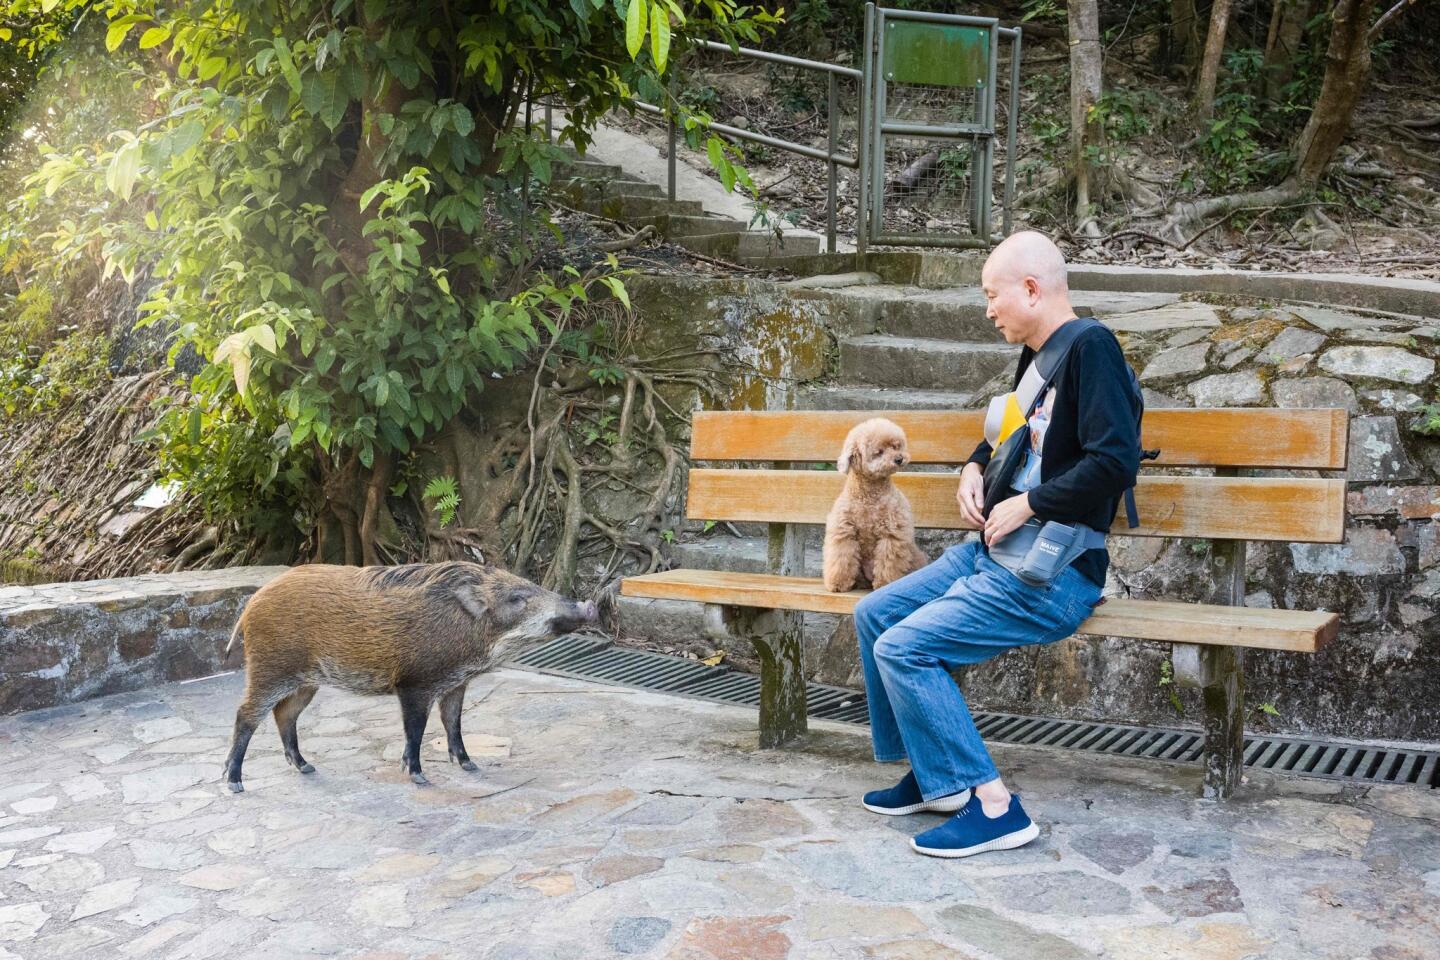 A wild boar walks close to a man sitting with his dog on a bench outside Hong Kong's Aberdeen Park.